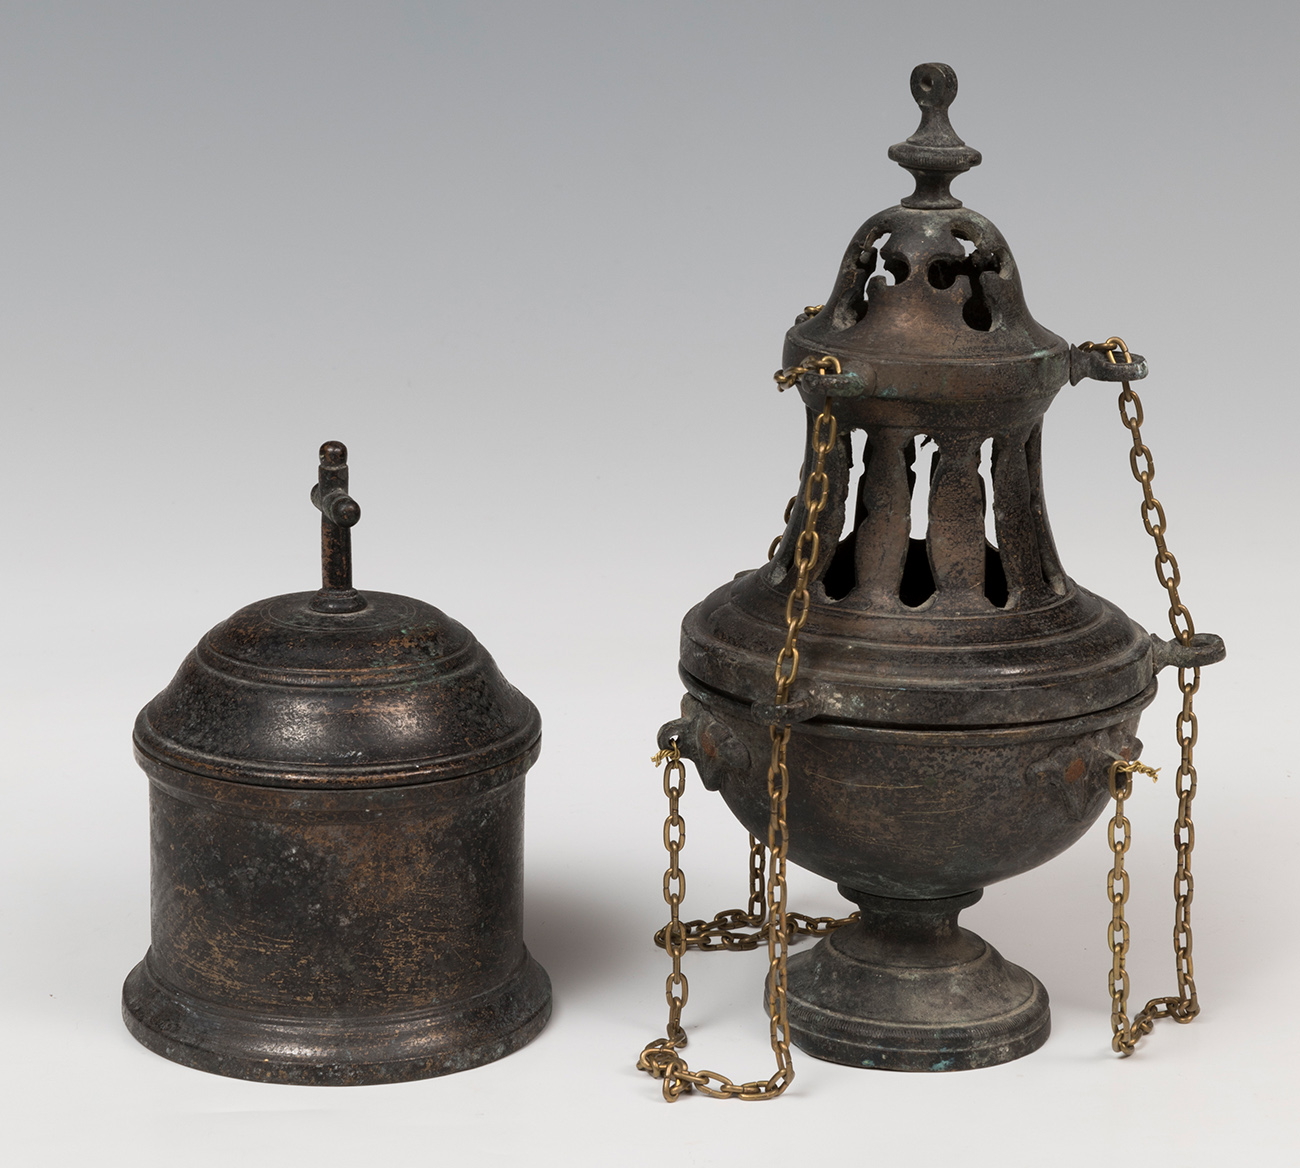 Pyxe and censer. Spain, 17th century.Patinated pewter.Measurements: 22 x 14 cm. censer; 15 x 10 x 10 - Image 4 of 4